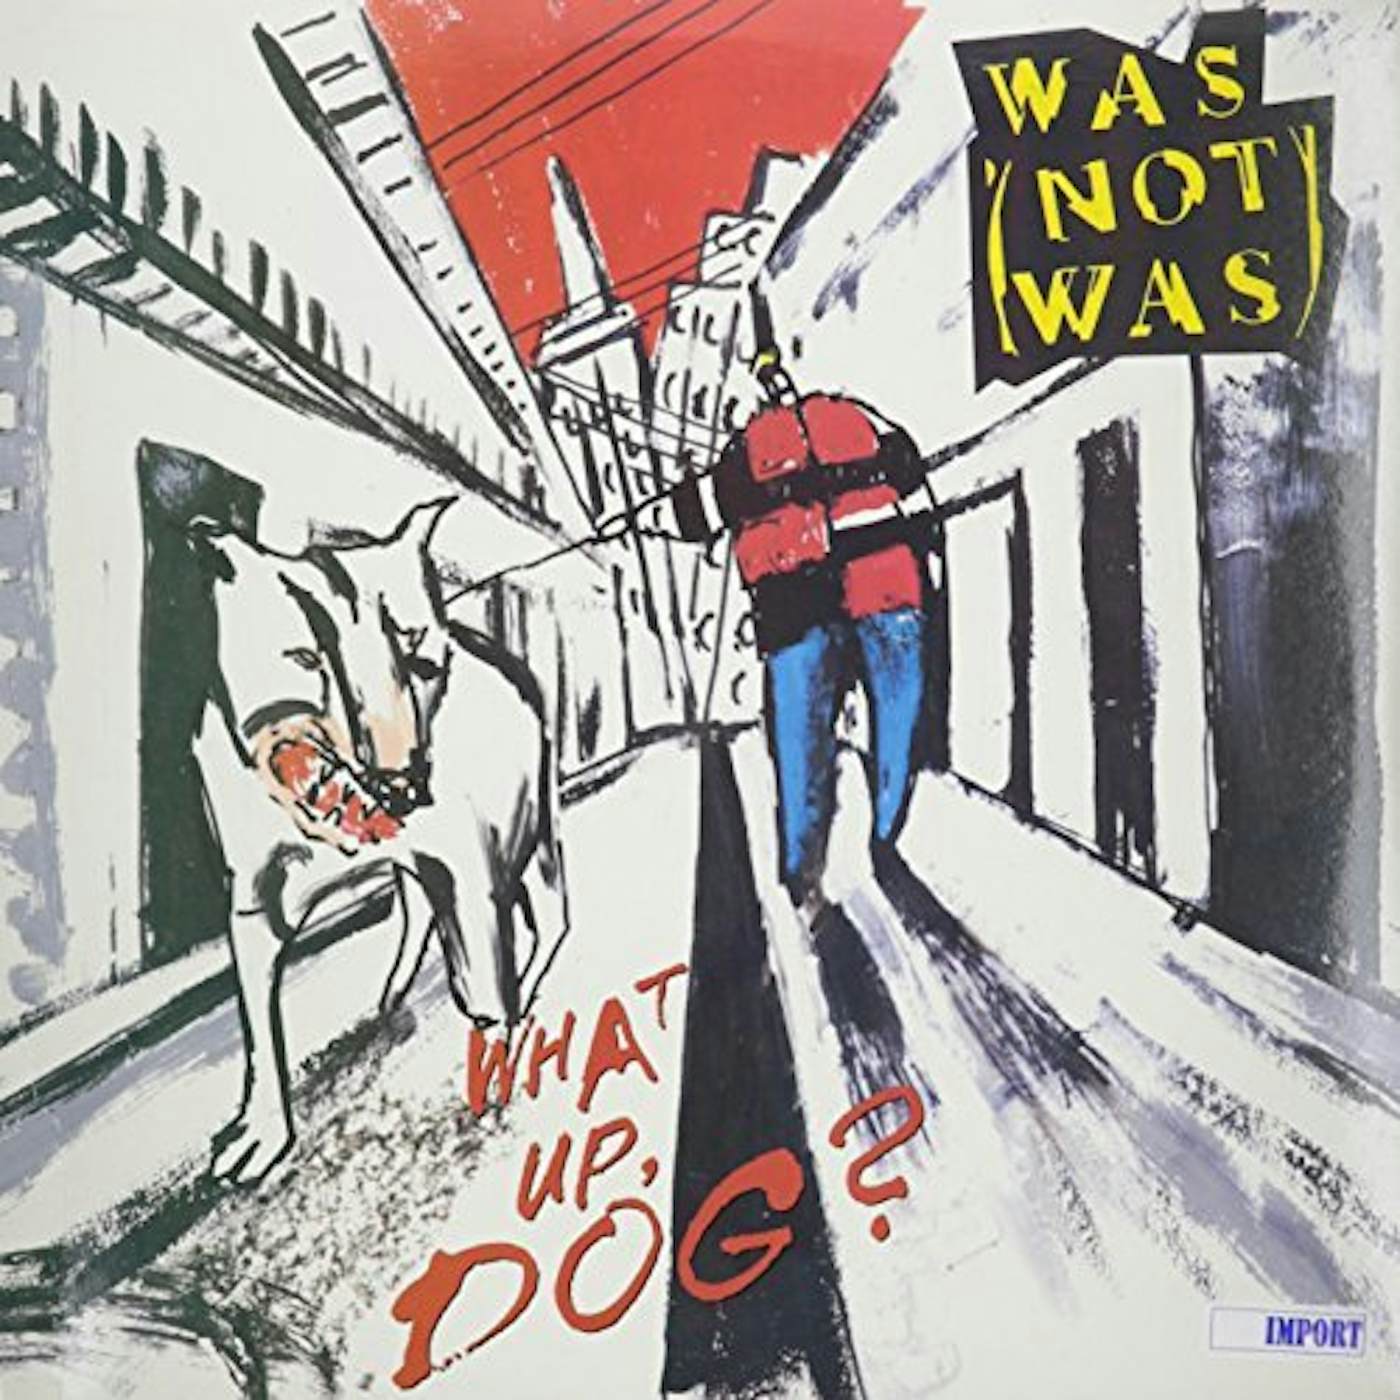 Was (Not Was) WHAT'S UP DOG (WALK THE DINOSAUR SPY IN THE HOUSE) Vinyl Record